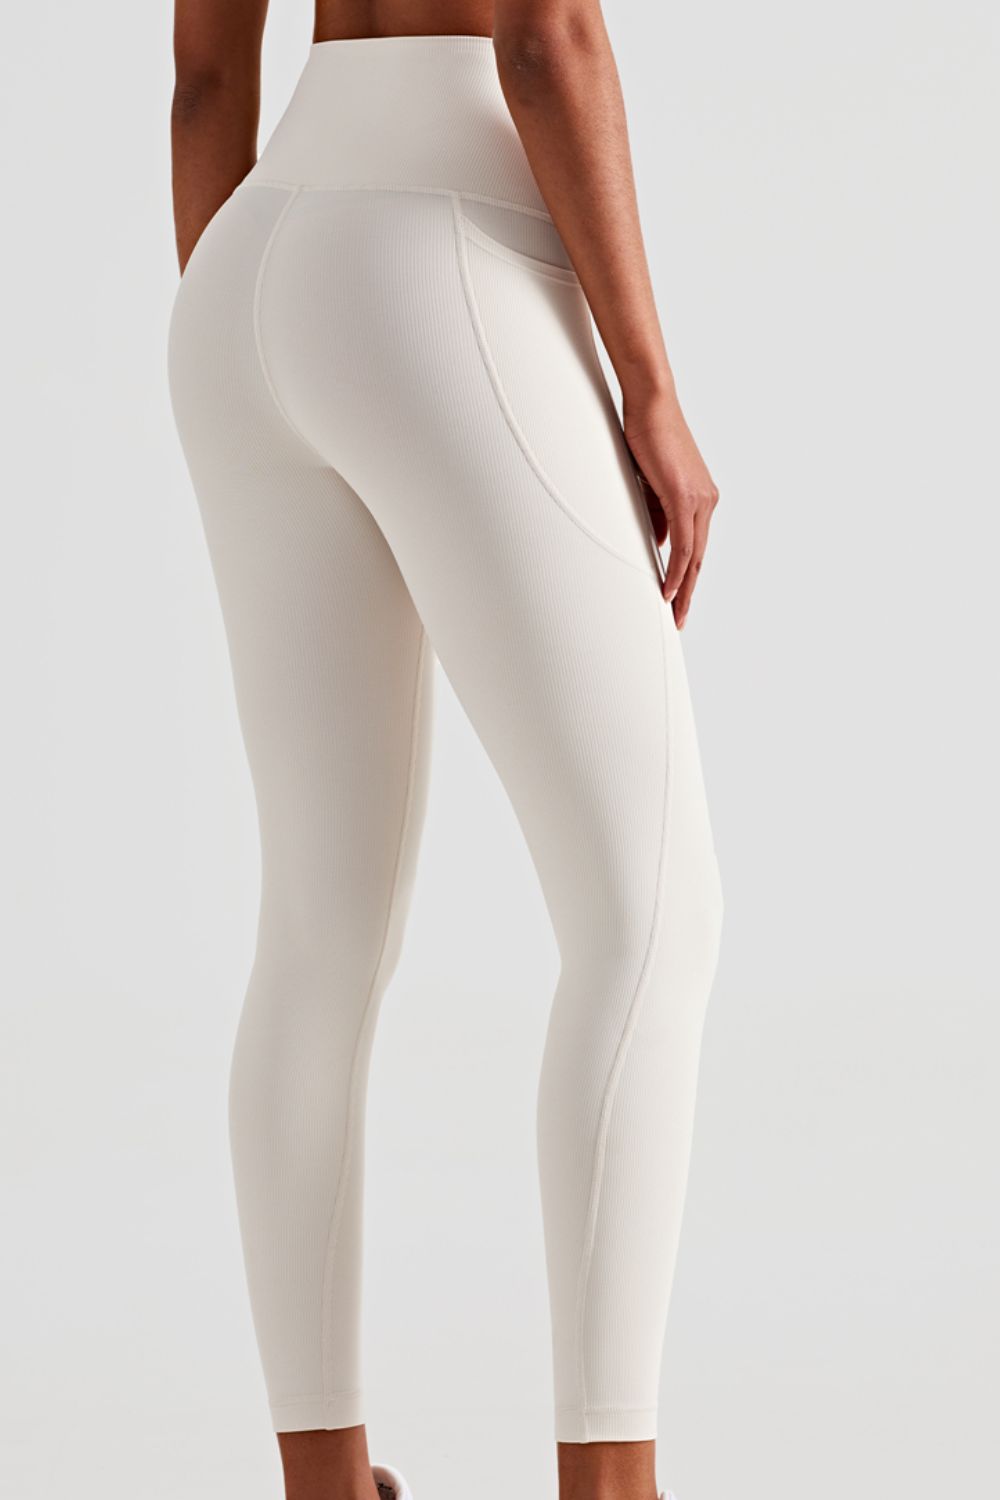 Lauren Soft and Breathable High-Waisted Yoga Leggings- 1 size 4/White and 1 size 4/Khaki left! FINAL SALE!